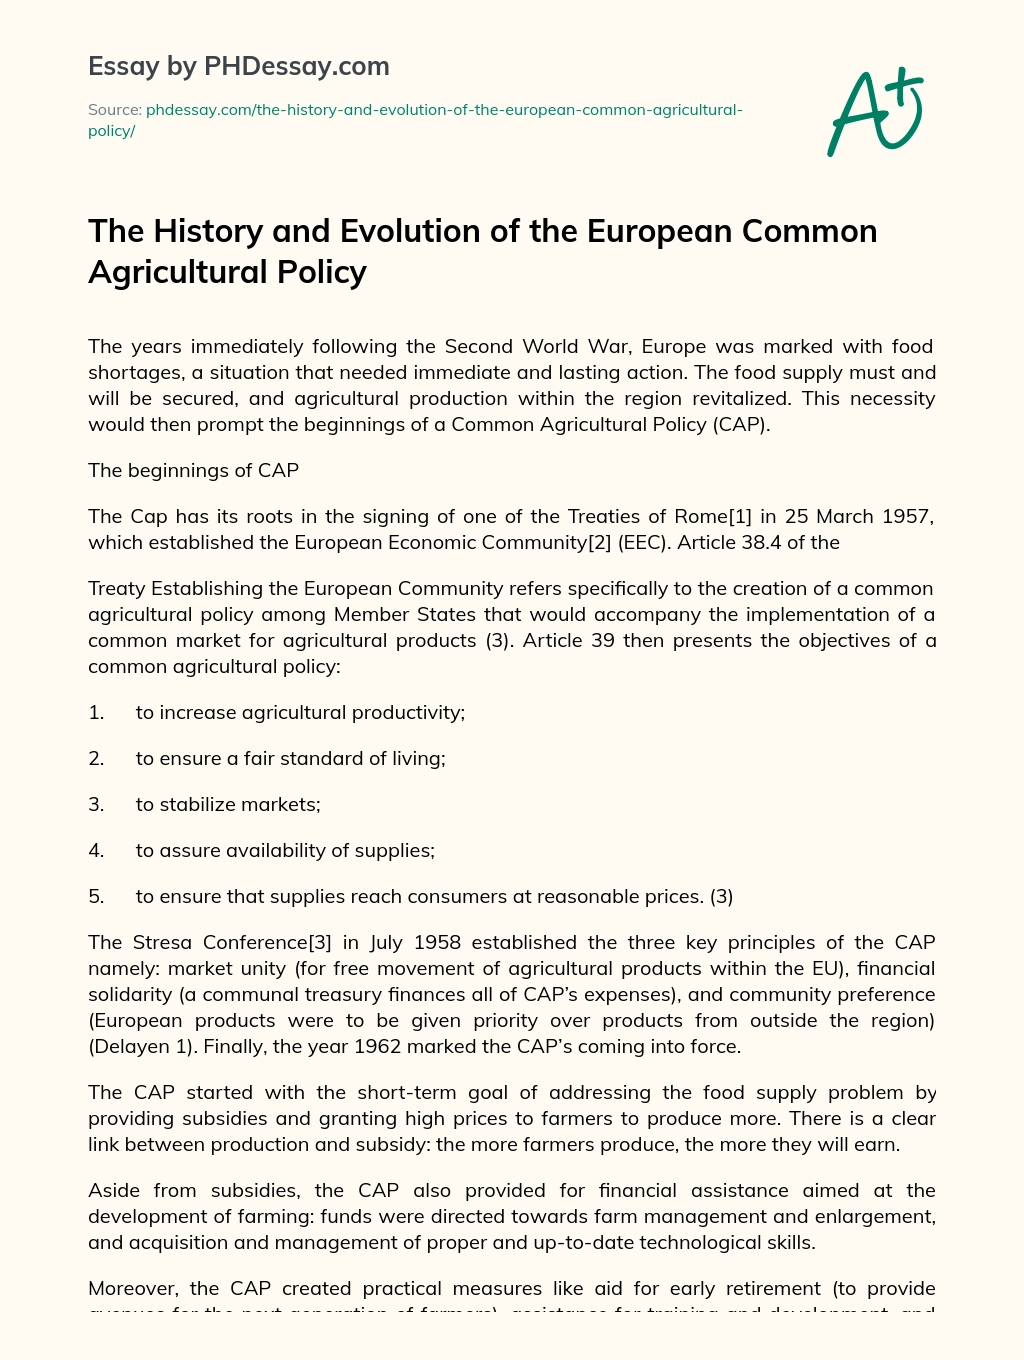 The History and Evolution of the European Common Agricultural Policy essay